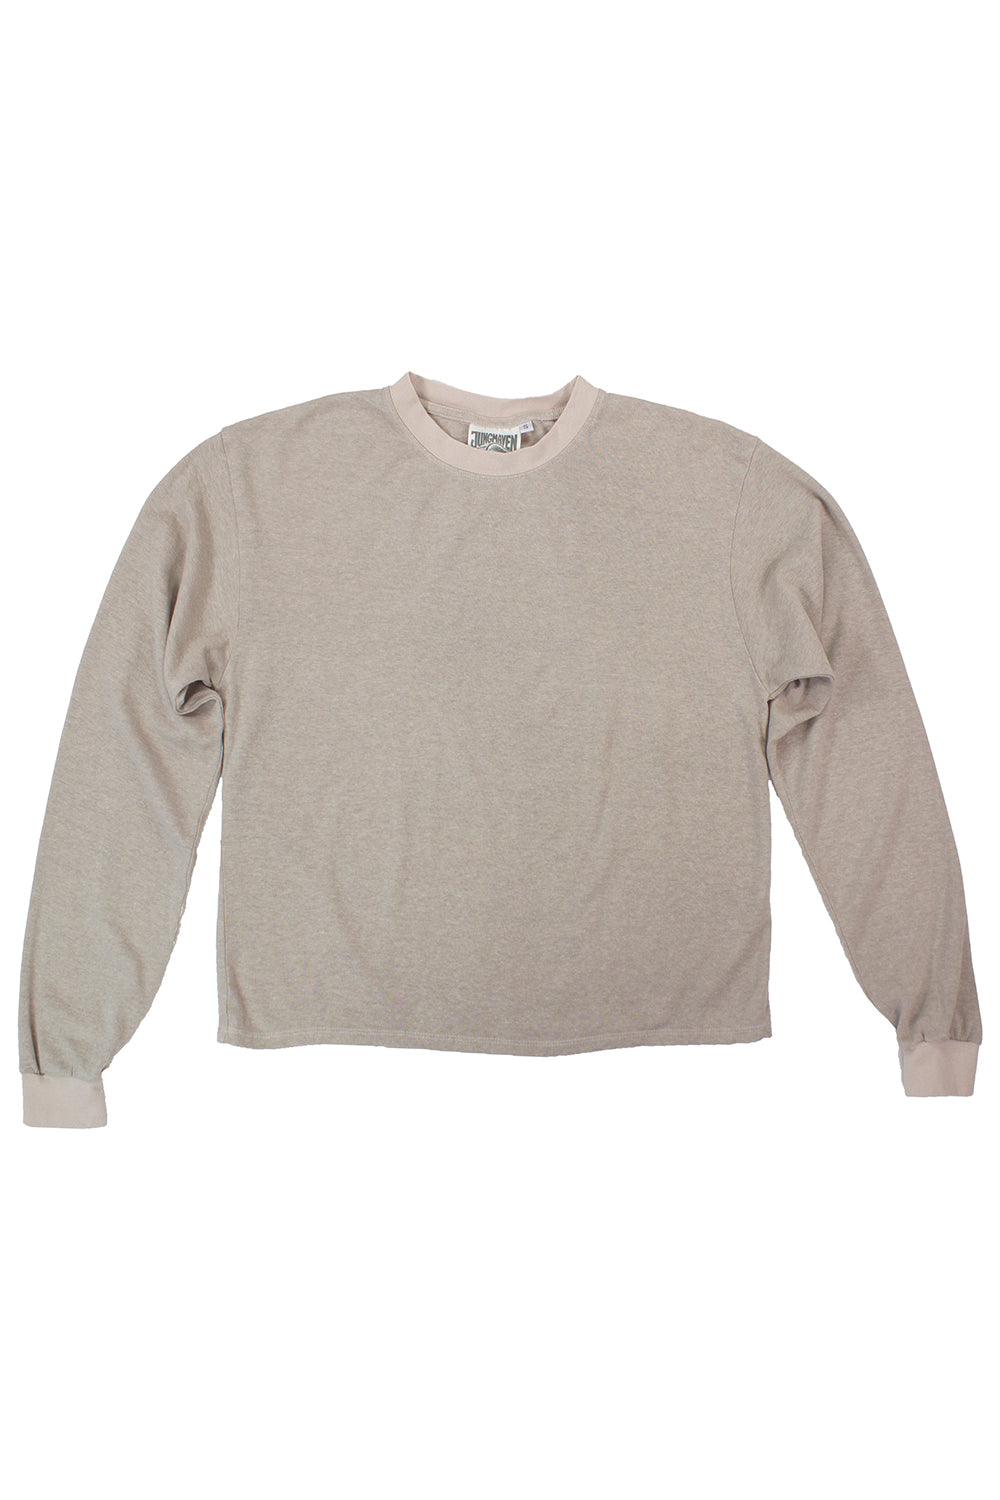 Tatoosh Cropped Long Sleeve Tee | Jungmaven Hemp Clothing & Accessories / Color: Canvas